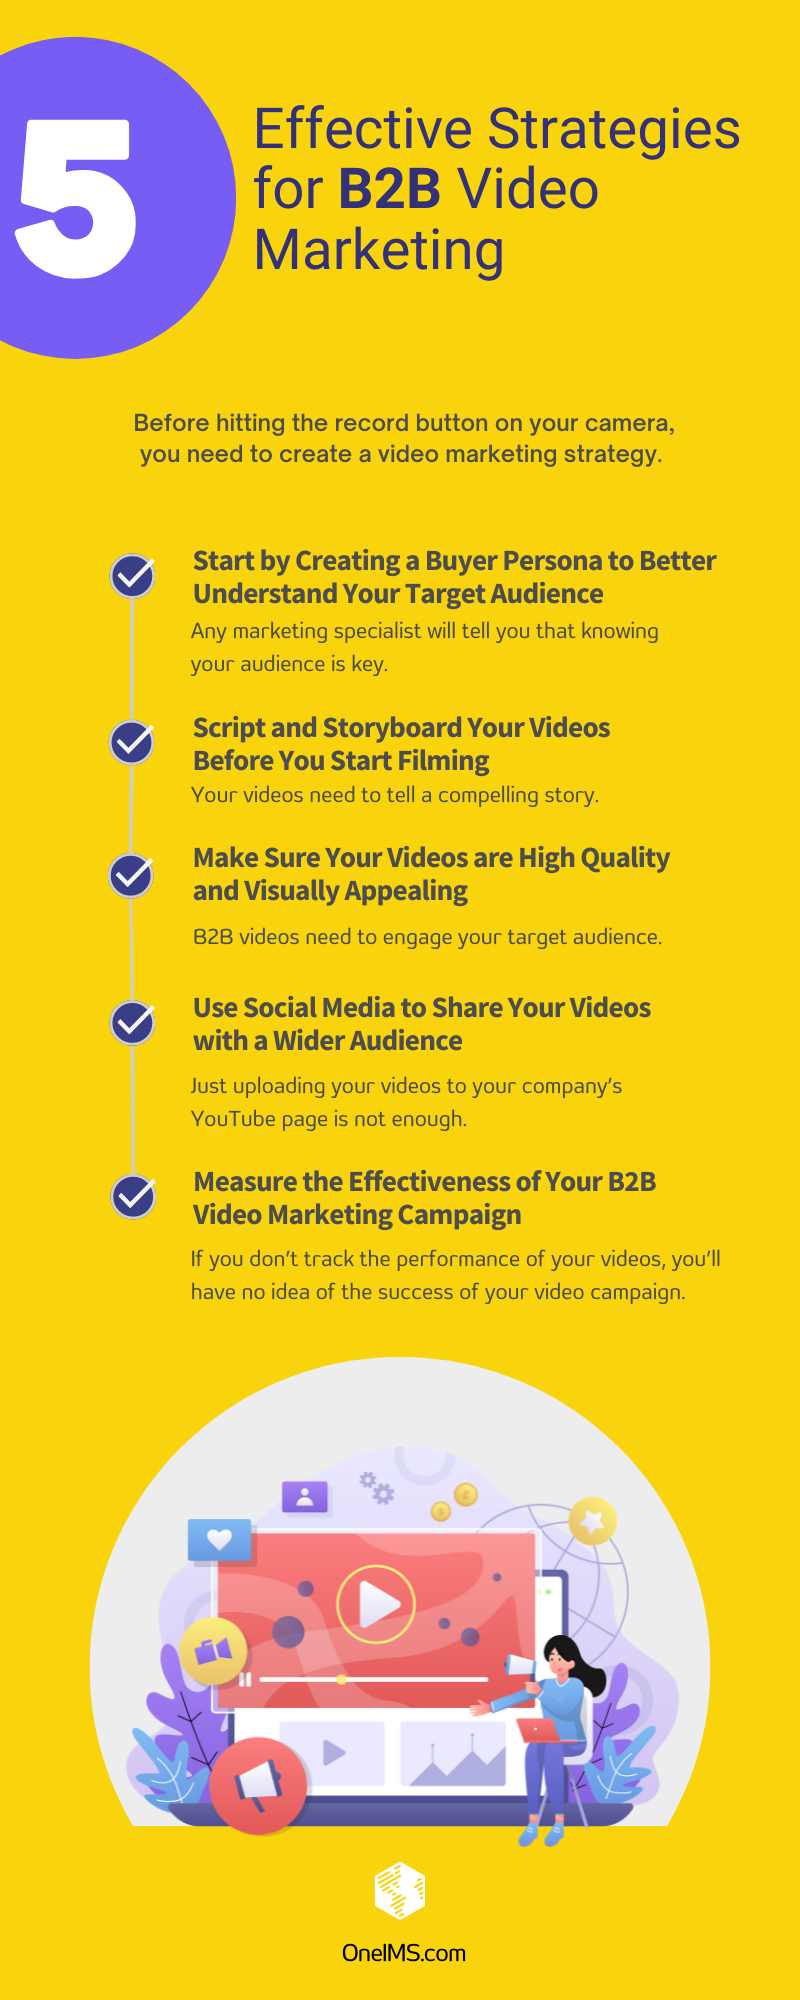 Video Content Strategy for B2B